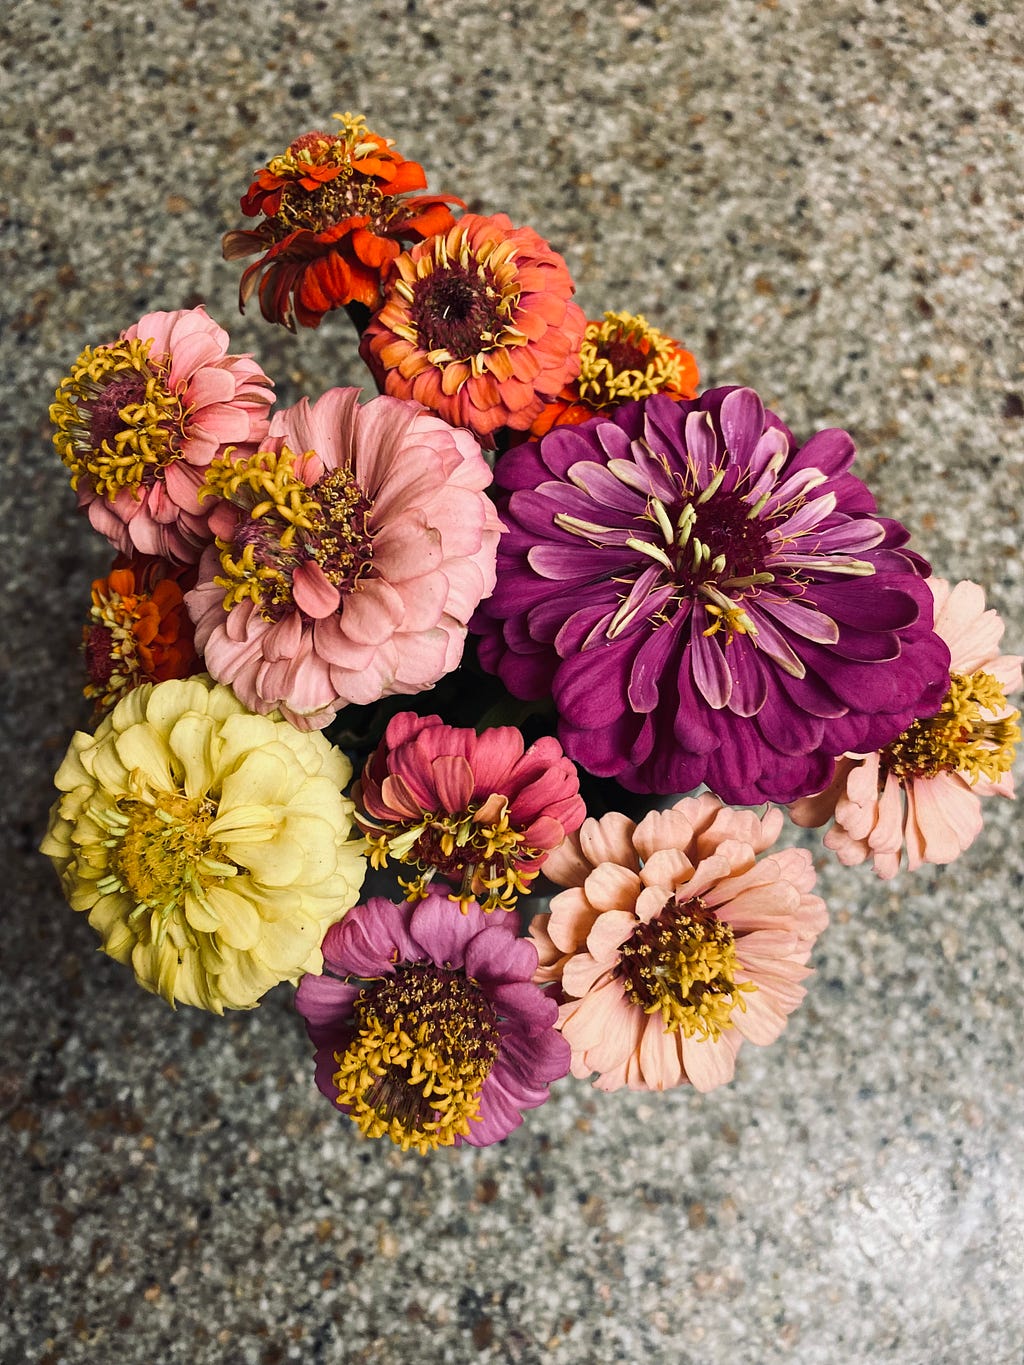 Zinnia Flowers i harvested from my plot at the community garden.